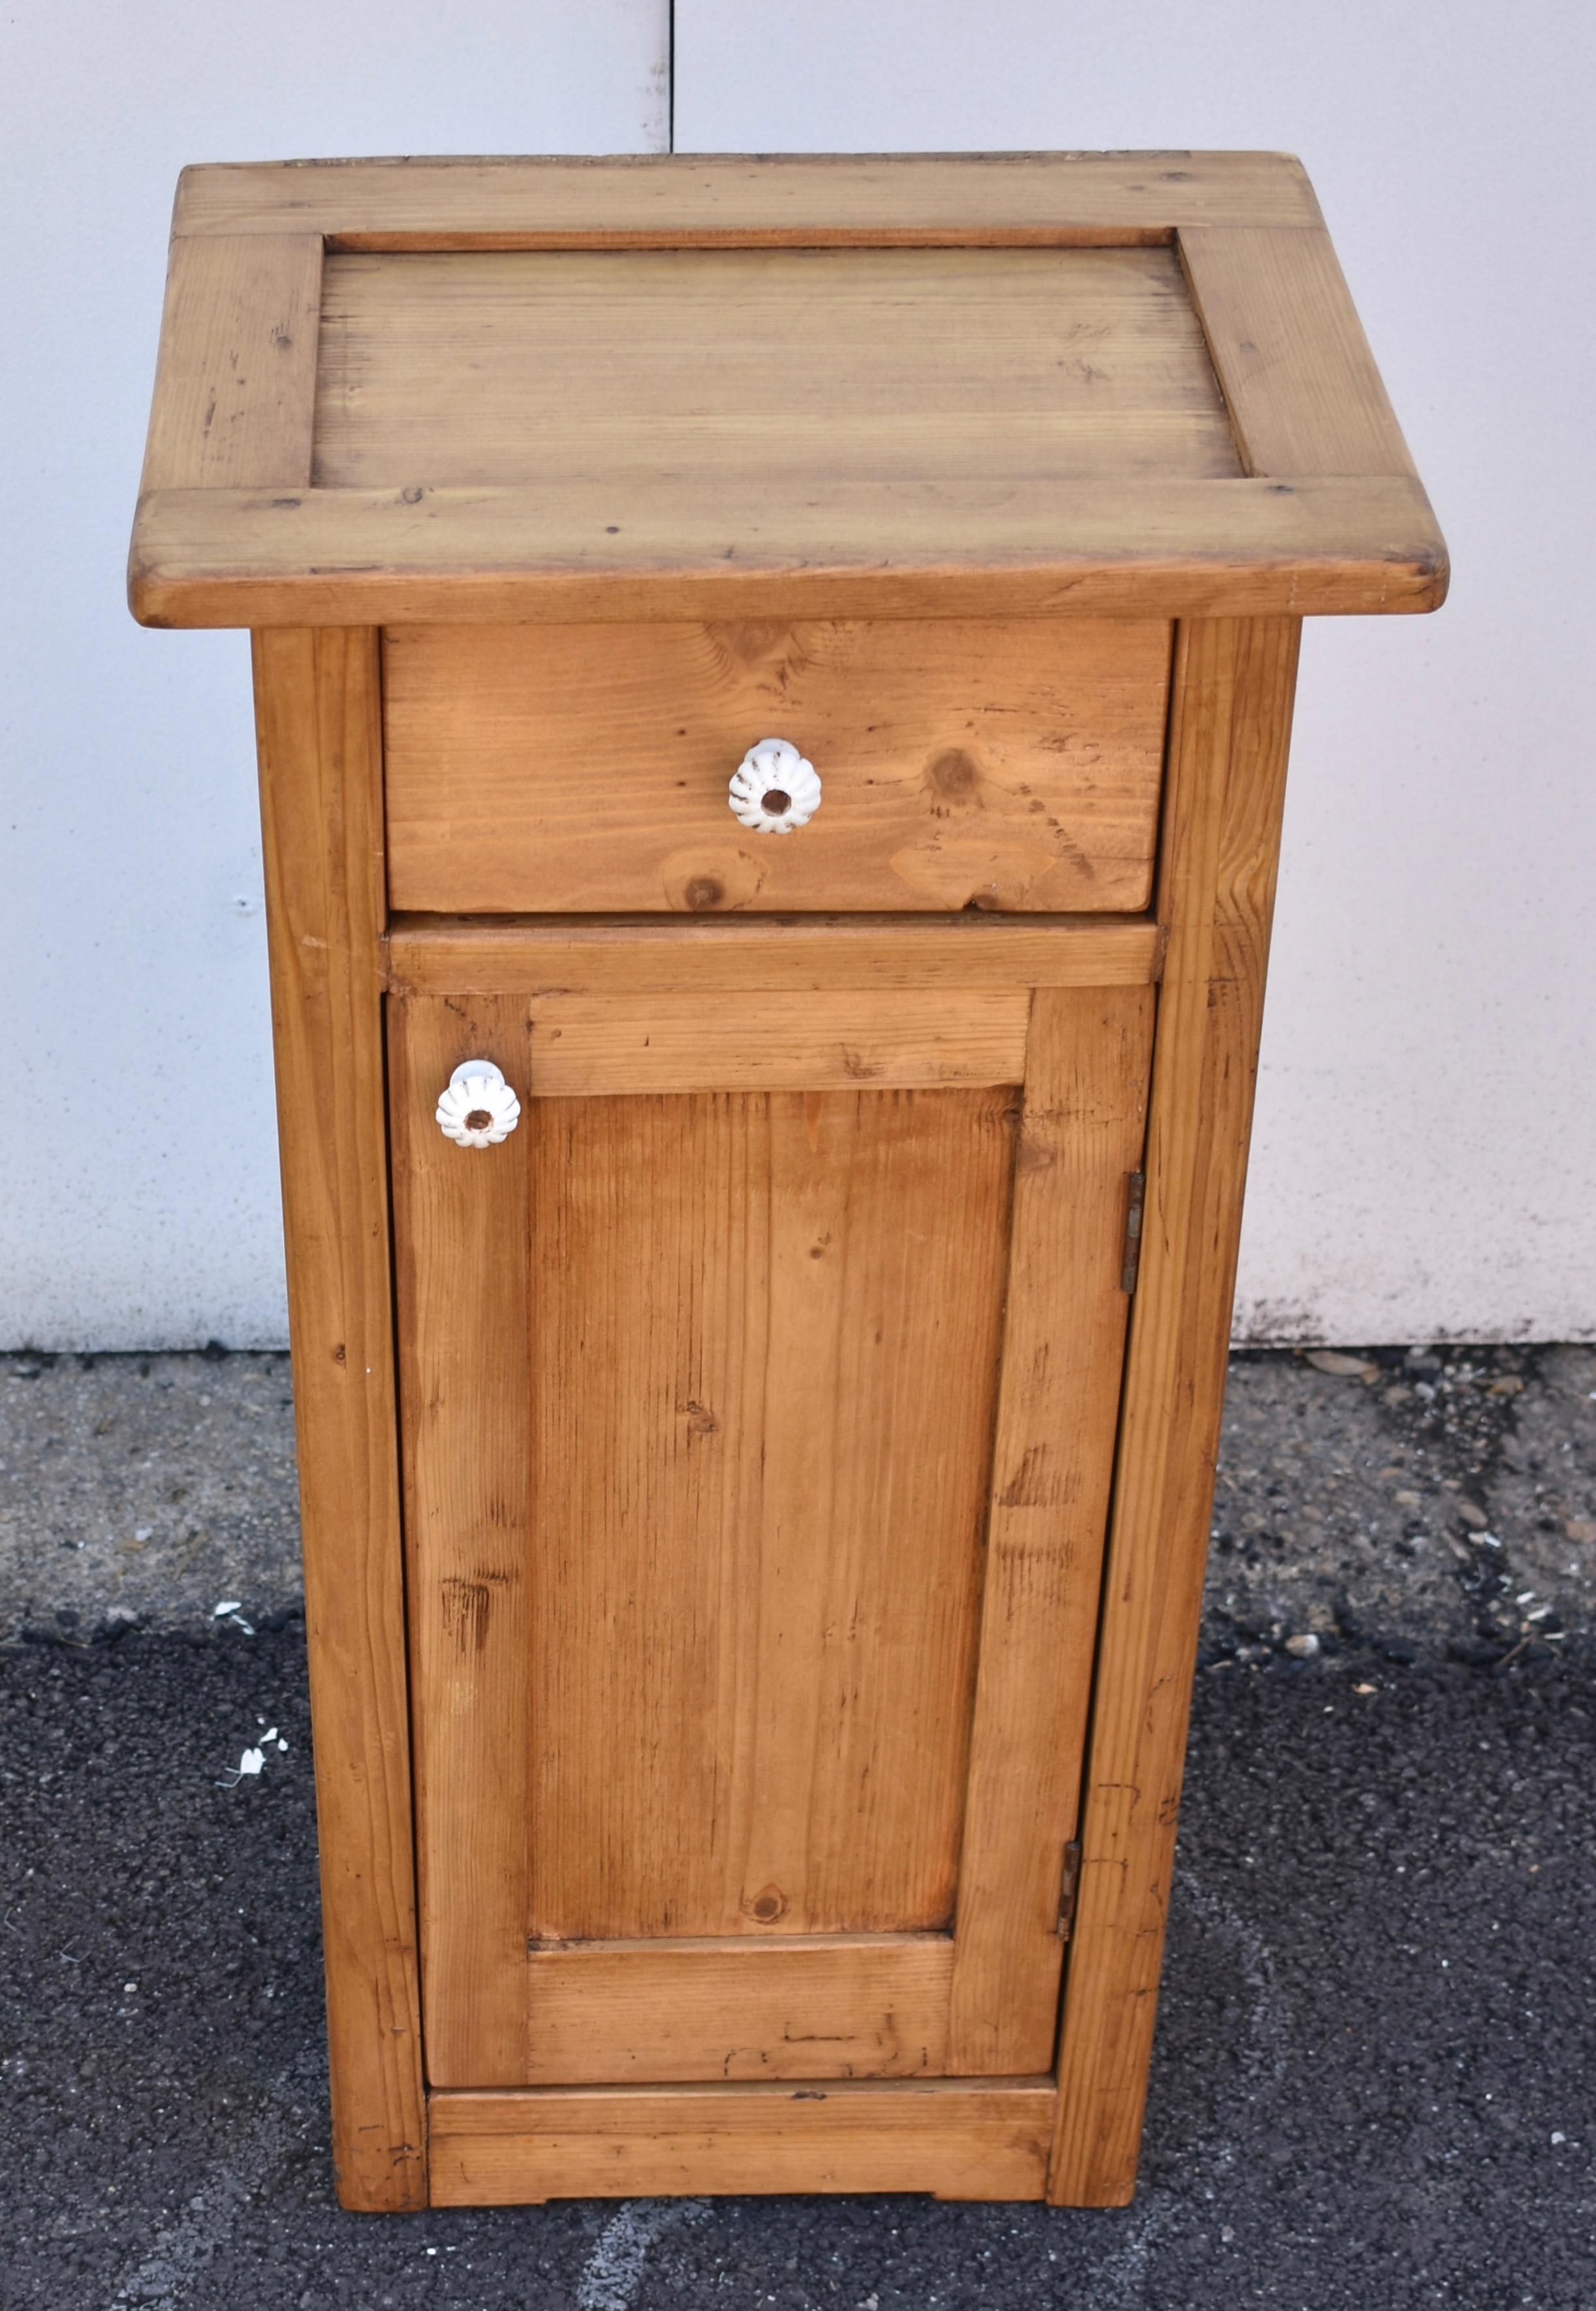 This slender nightstand has a lovely color and form with its large overhang, straight lines and clear wood. The top is recessed and may once have had a glass or marble insert. With a single drawer and a flat paneled door.


